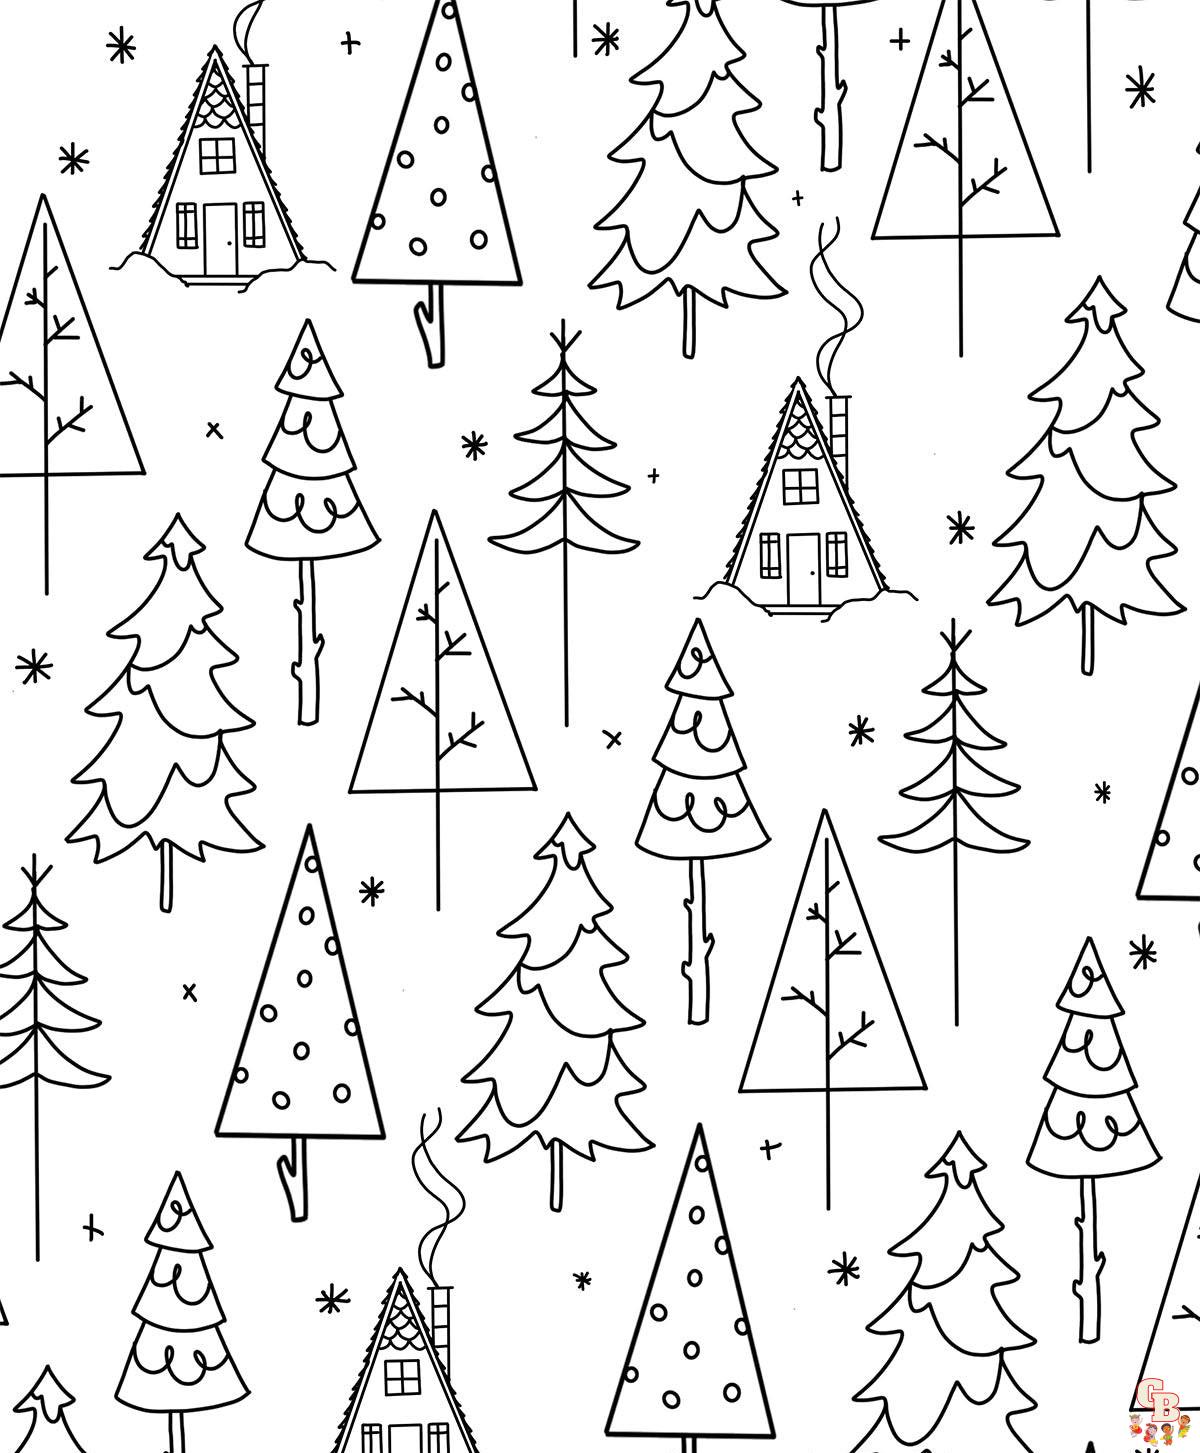 December Coloring Pages 3